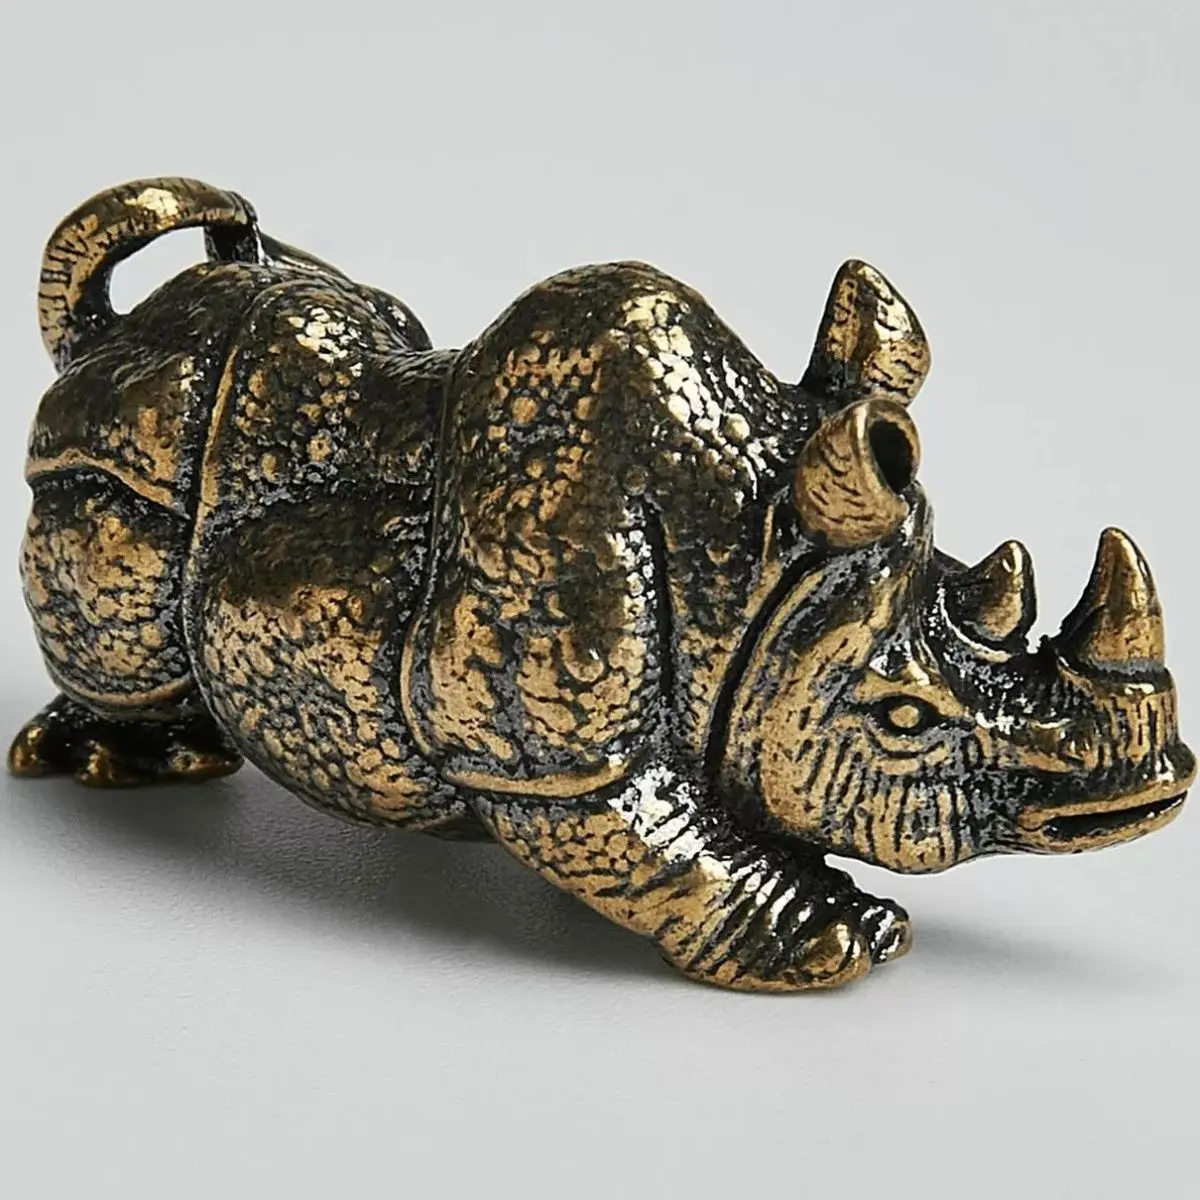 Brass made old rhinoceros ornaments, home tabletop decorations, retro solid tea pets, tea toys, mini handle pieces